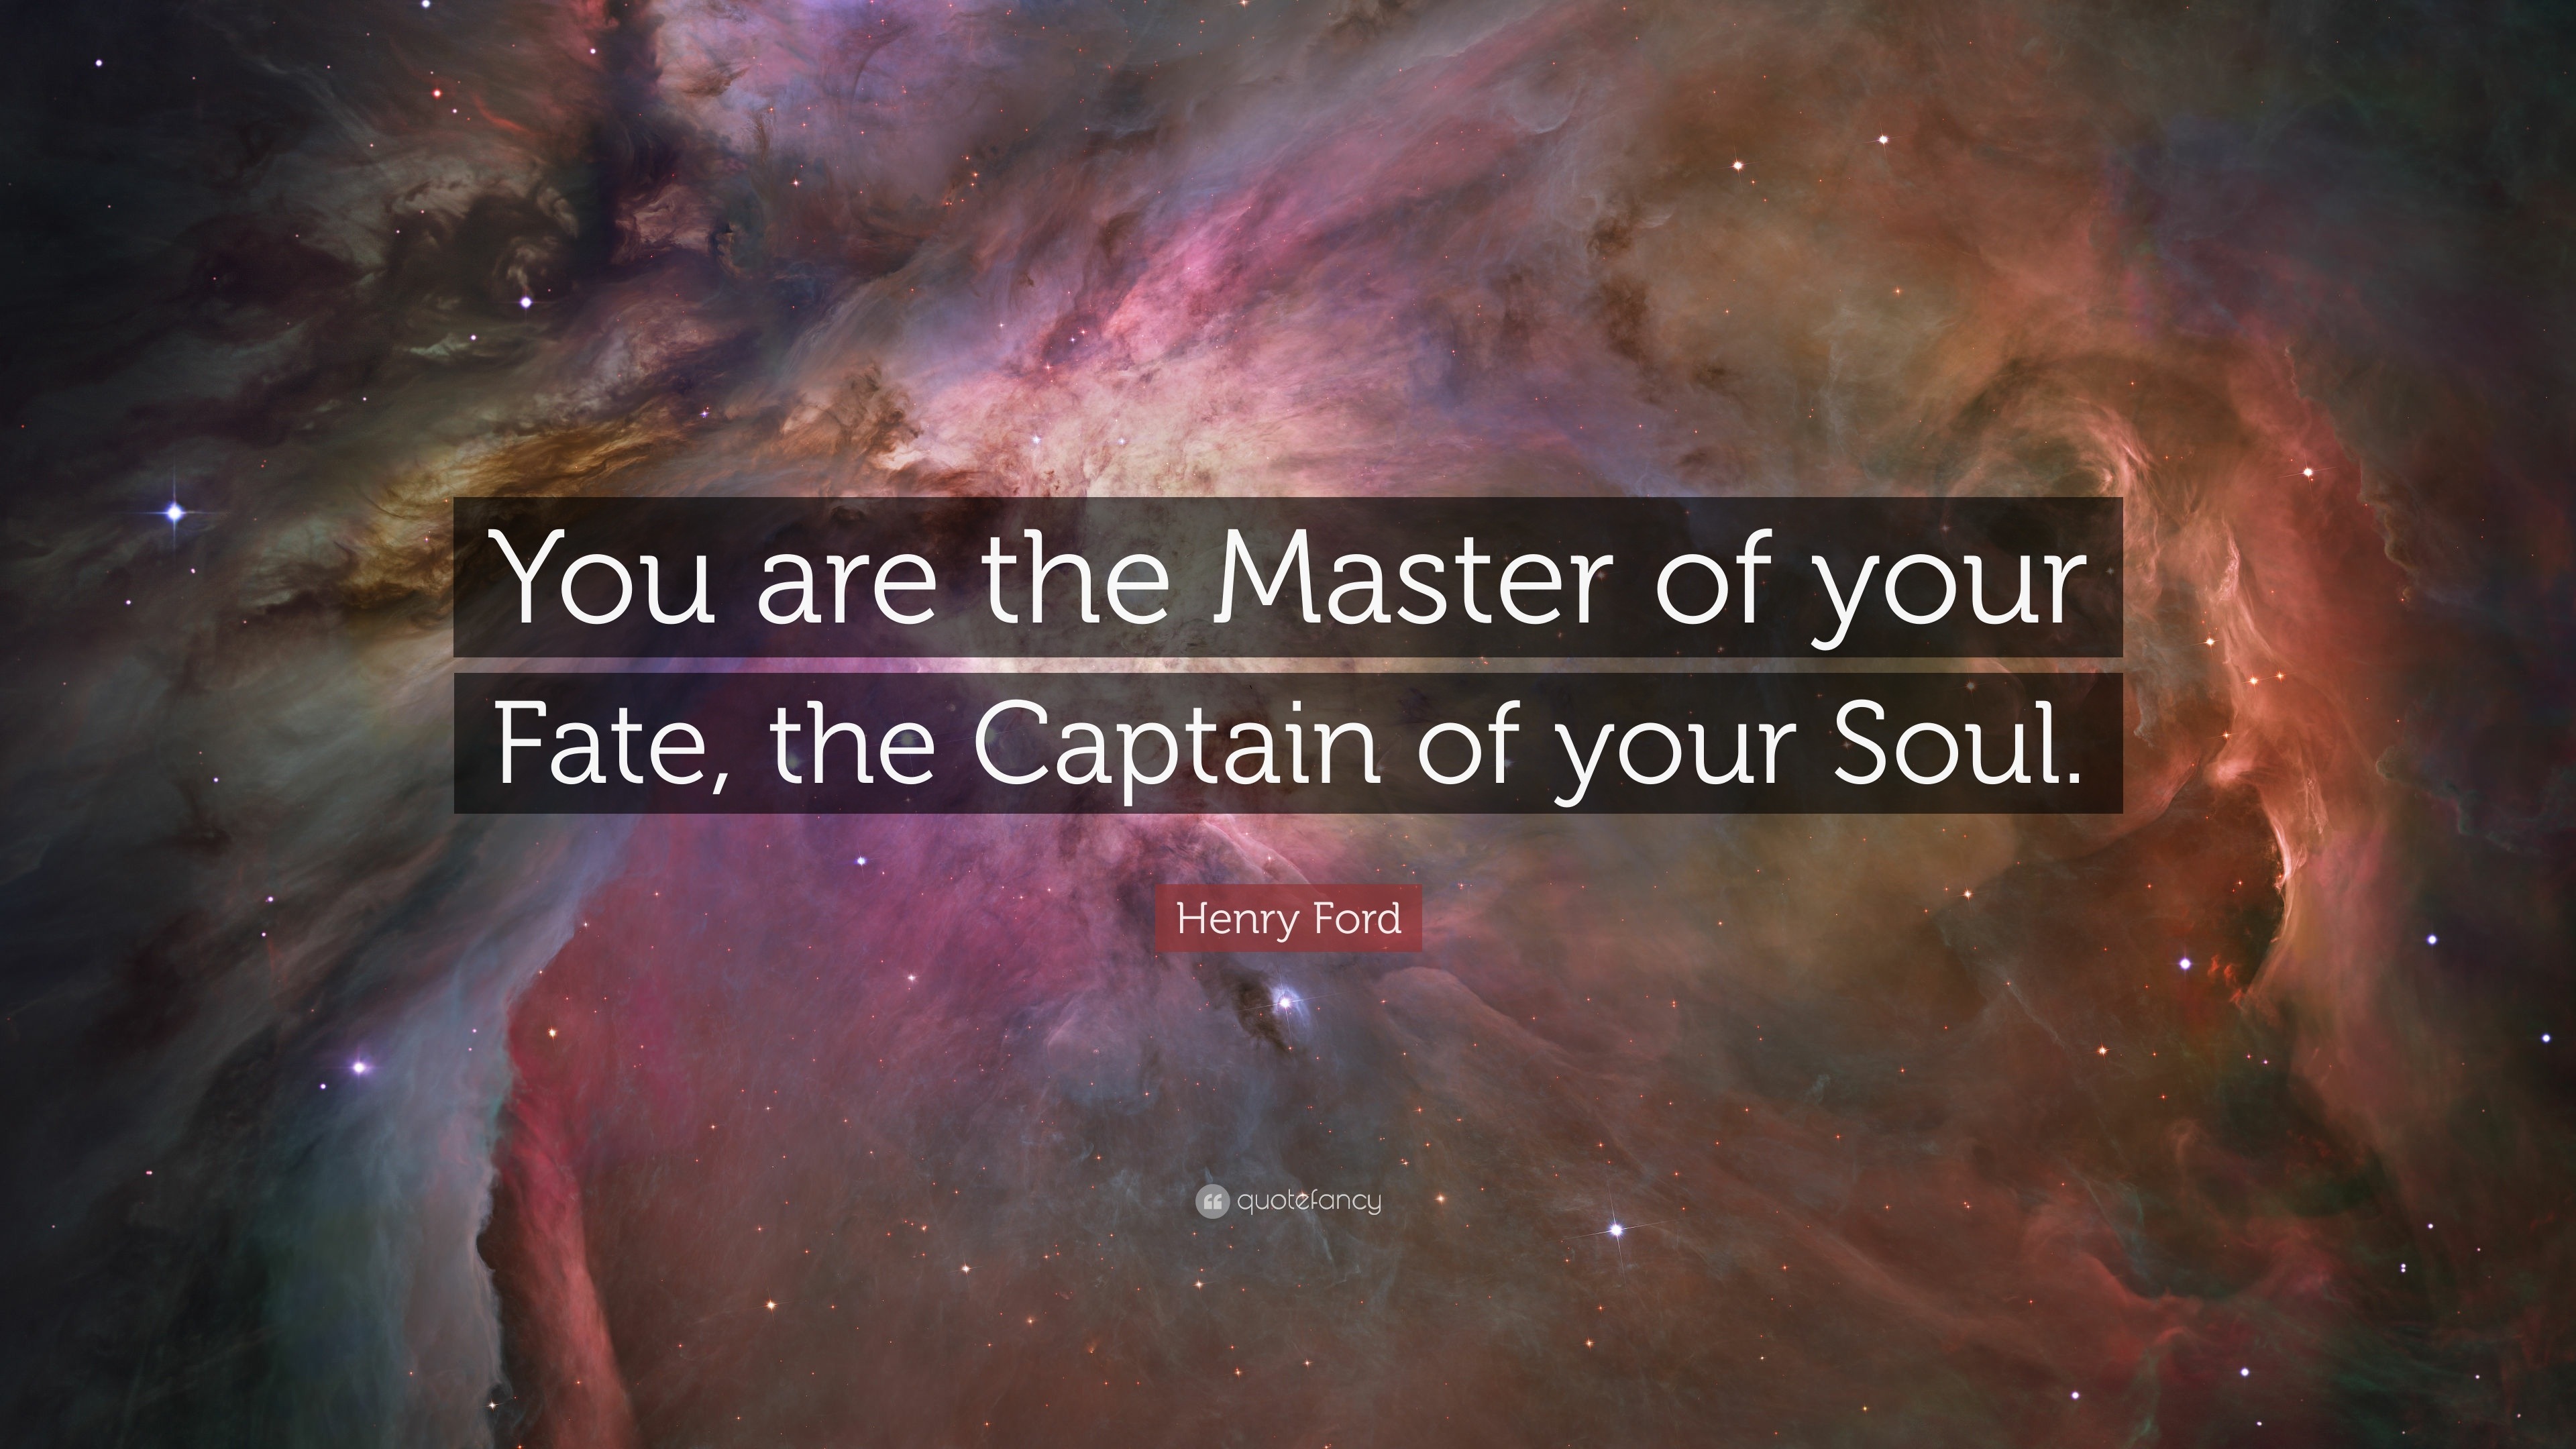 Henry Ford Quote: “You are the Master of your Fate, the Captain of